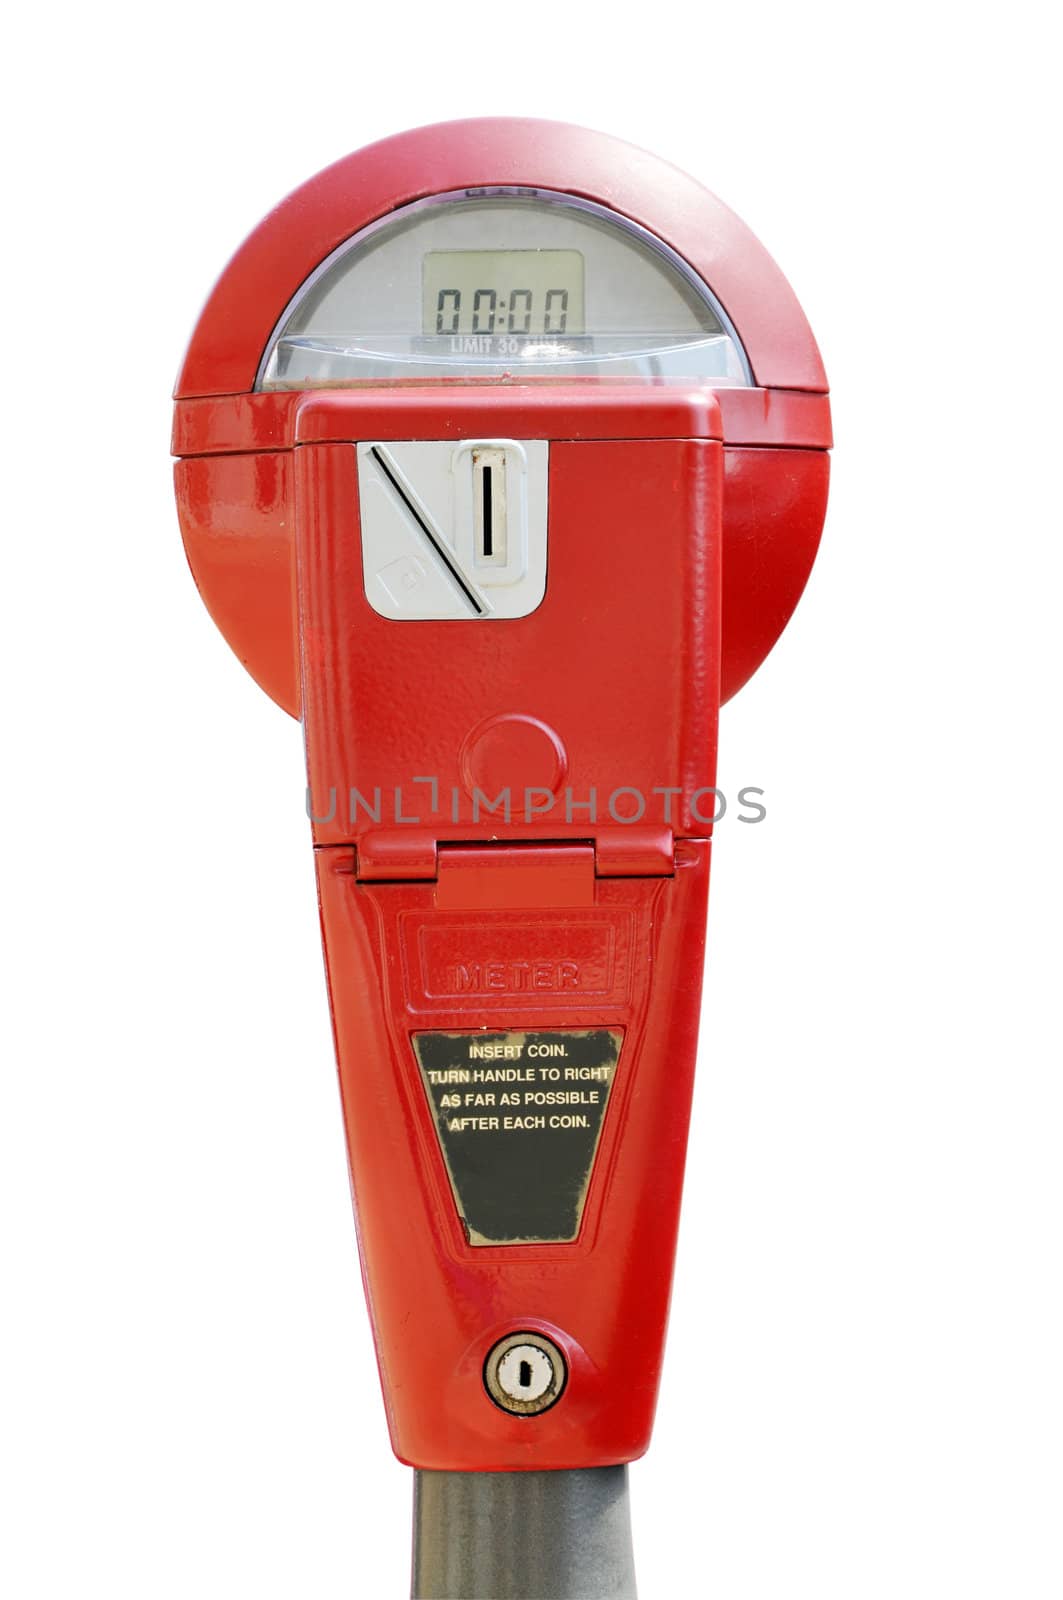 Red parking meter isolated on white background with clipping path.